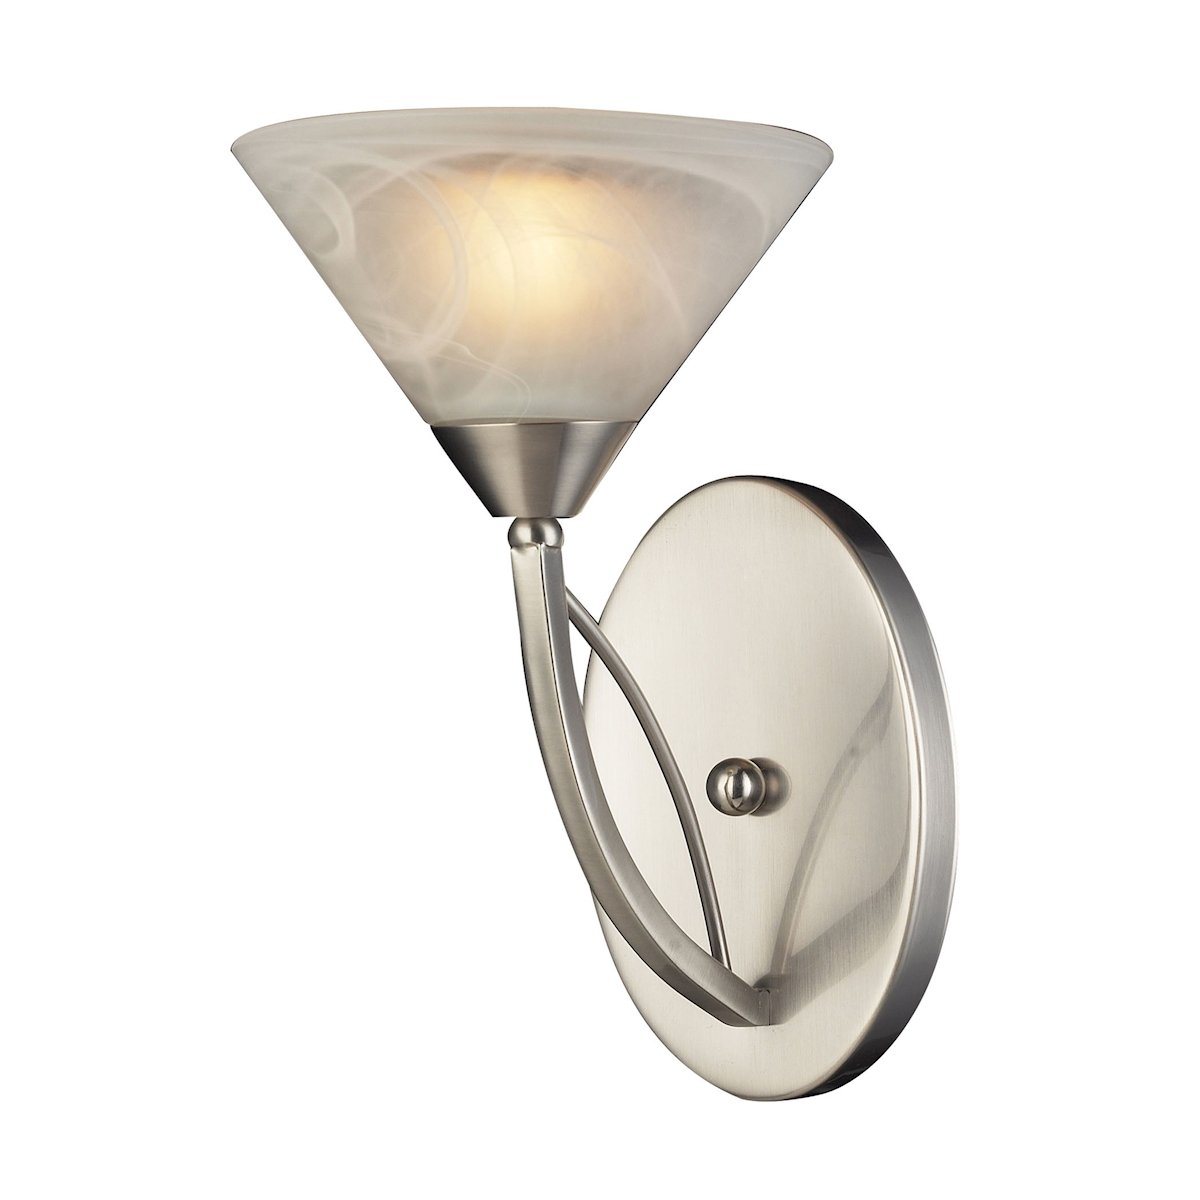 Elysburg 1 Light Wall Sconce In Satin Nickel And White Glass Wall Sconce Elk Lighting 